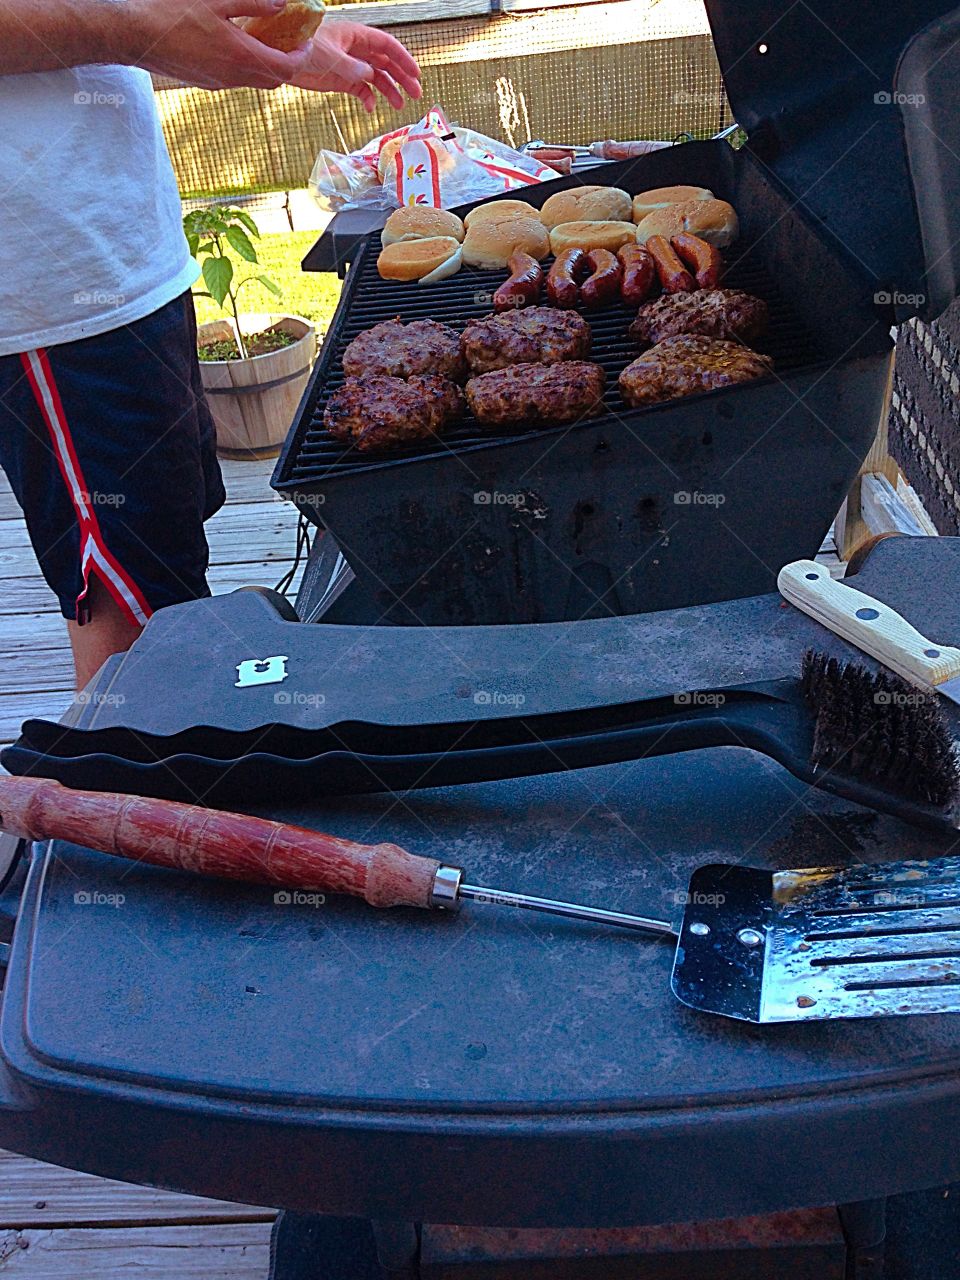 Tools of the trade. Proper tools are essential - it's barbecue time mission 
